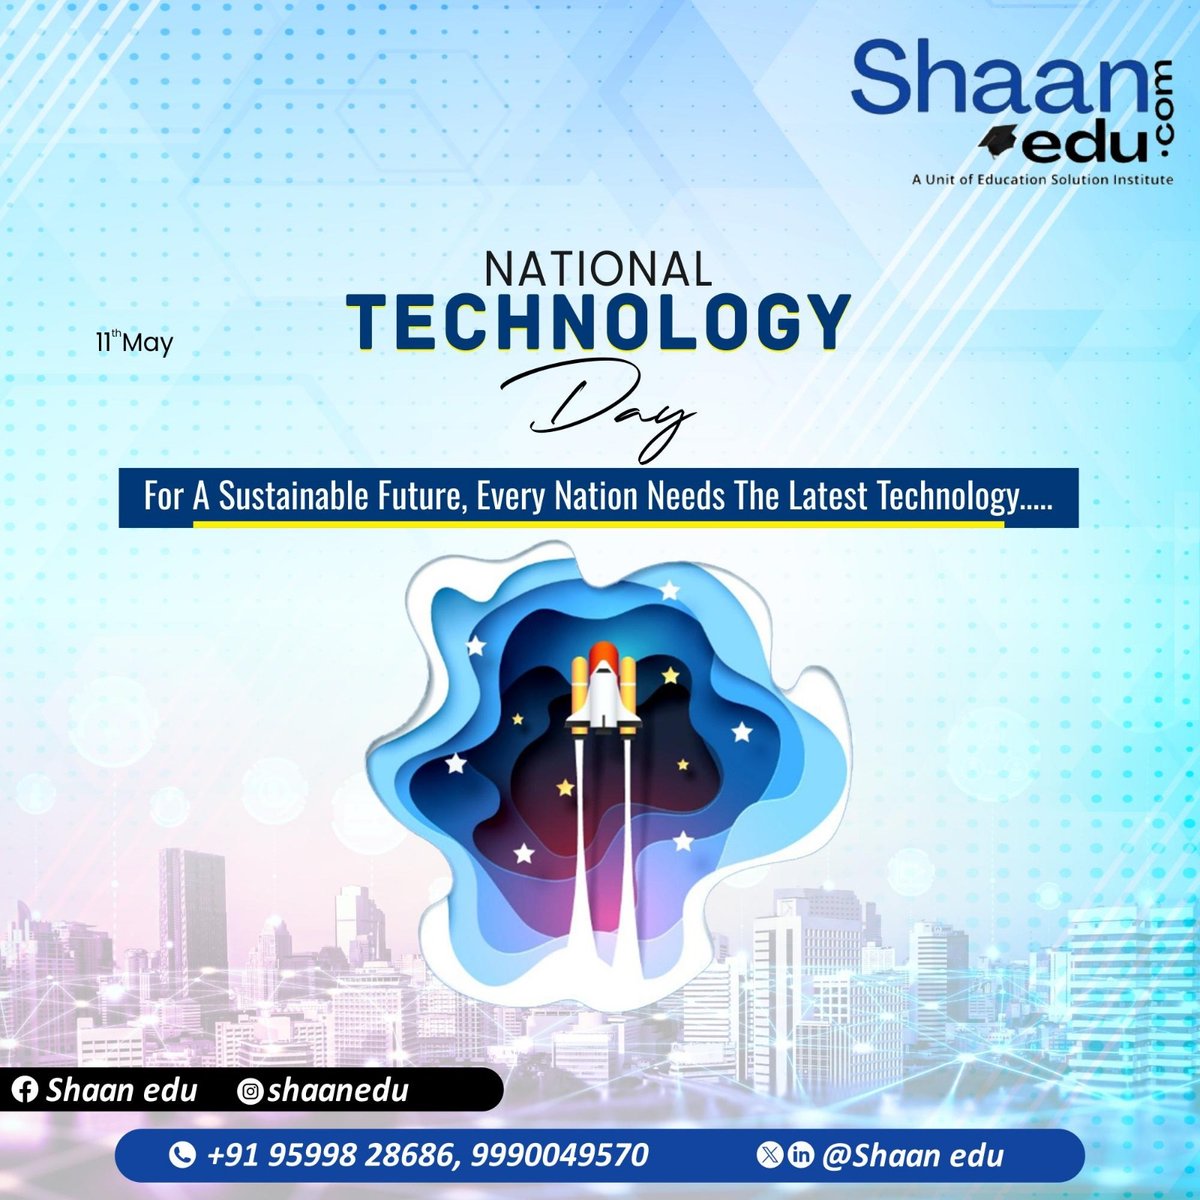 Happy National Technology Day! Let's celebrate innovation, knowledge, and progress. Together, we pave the way for a brighter future through education and technology. Keep inspiring and creating. #NationalTechnologyDay #shanedu #Technicaleducation